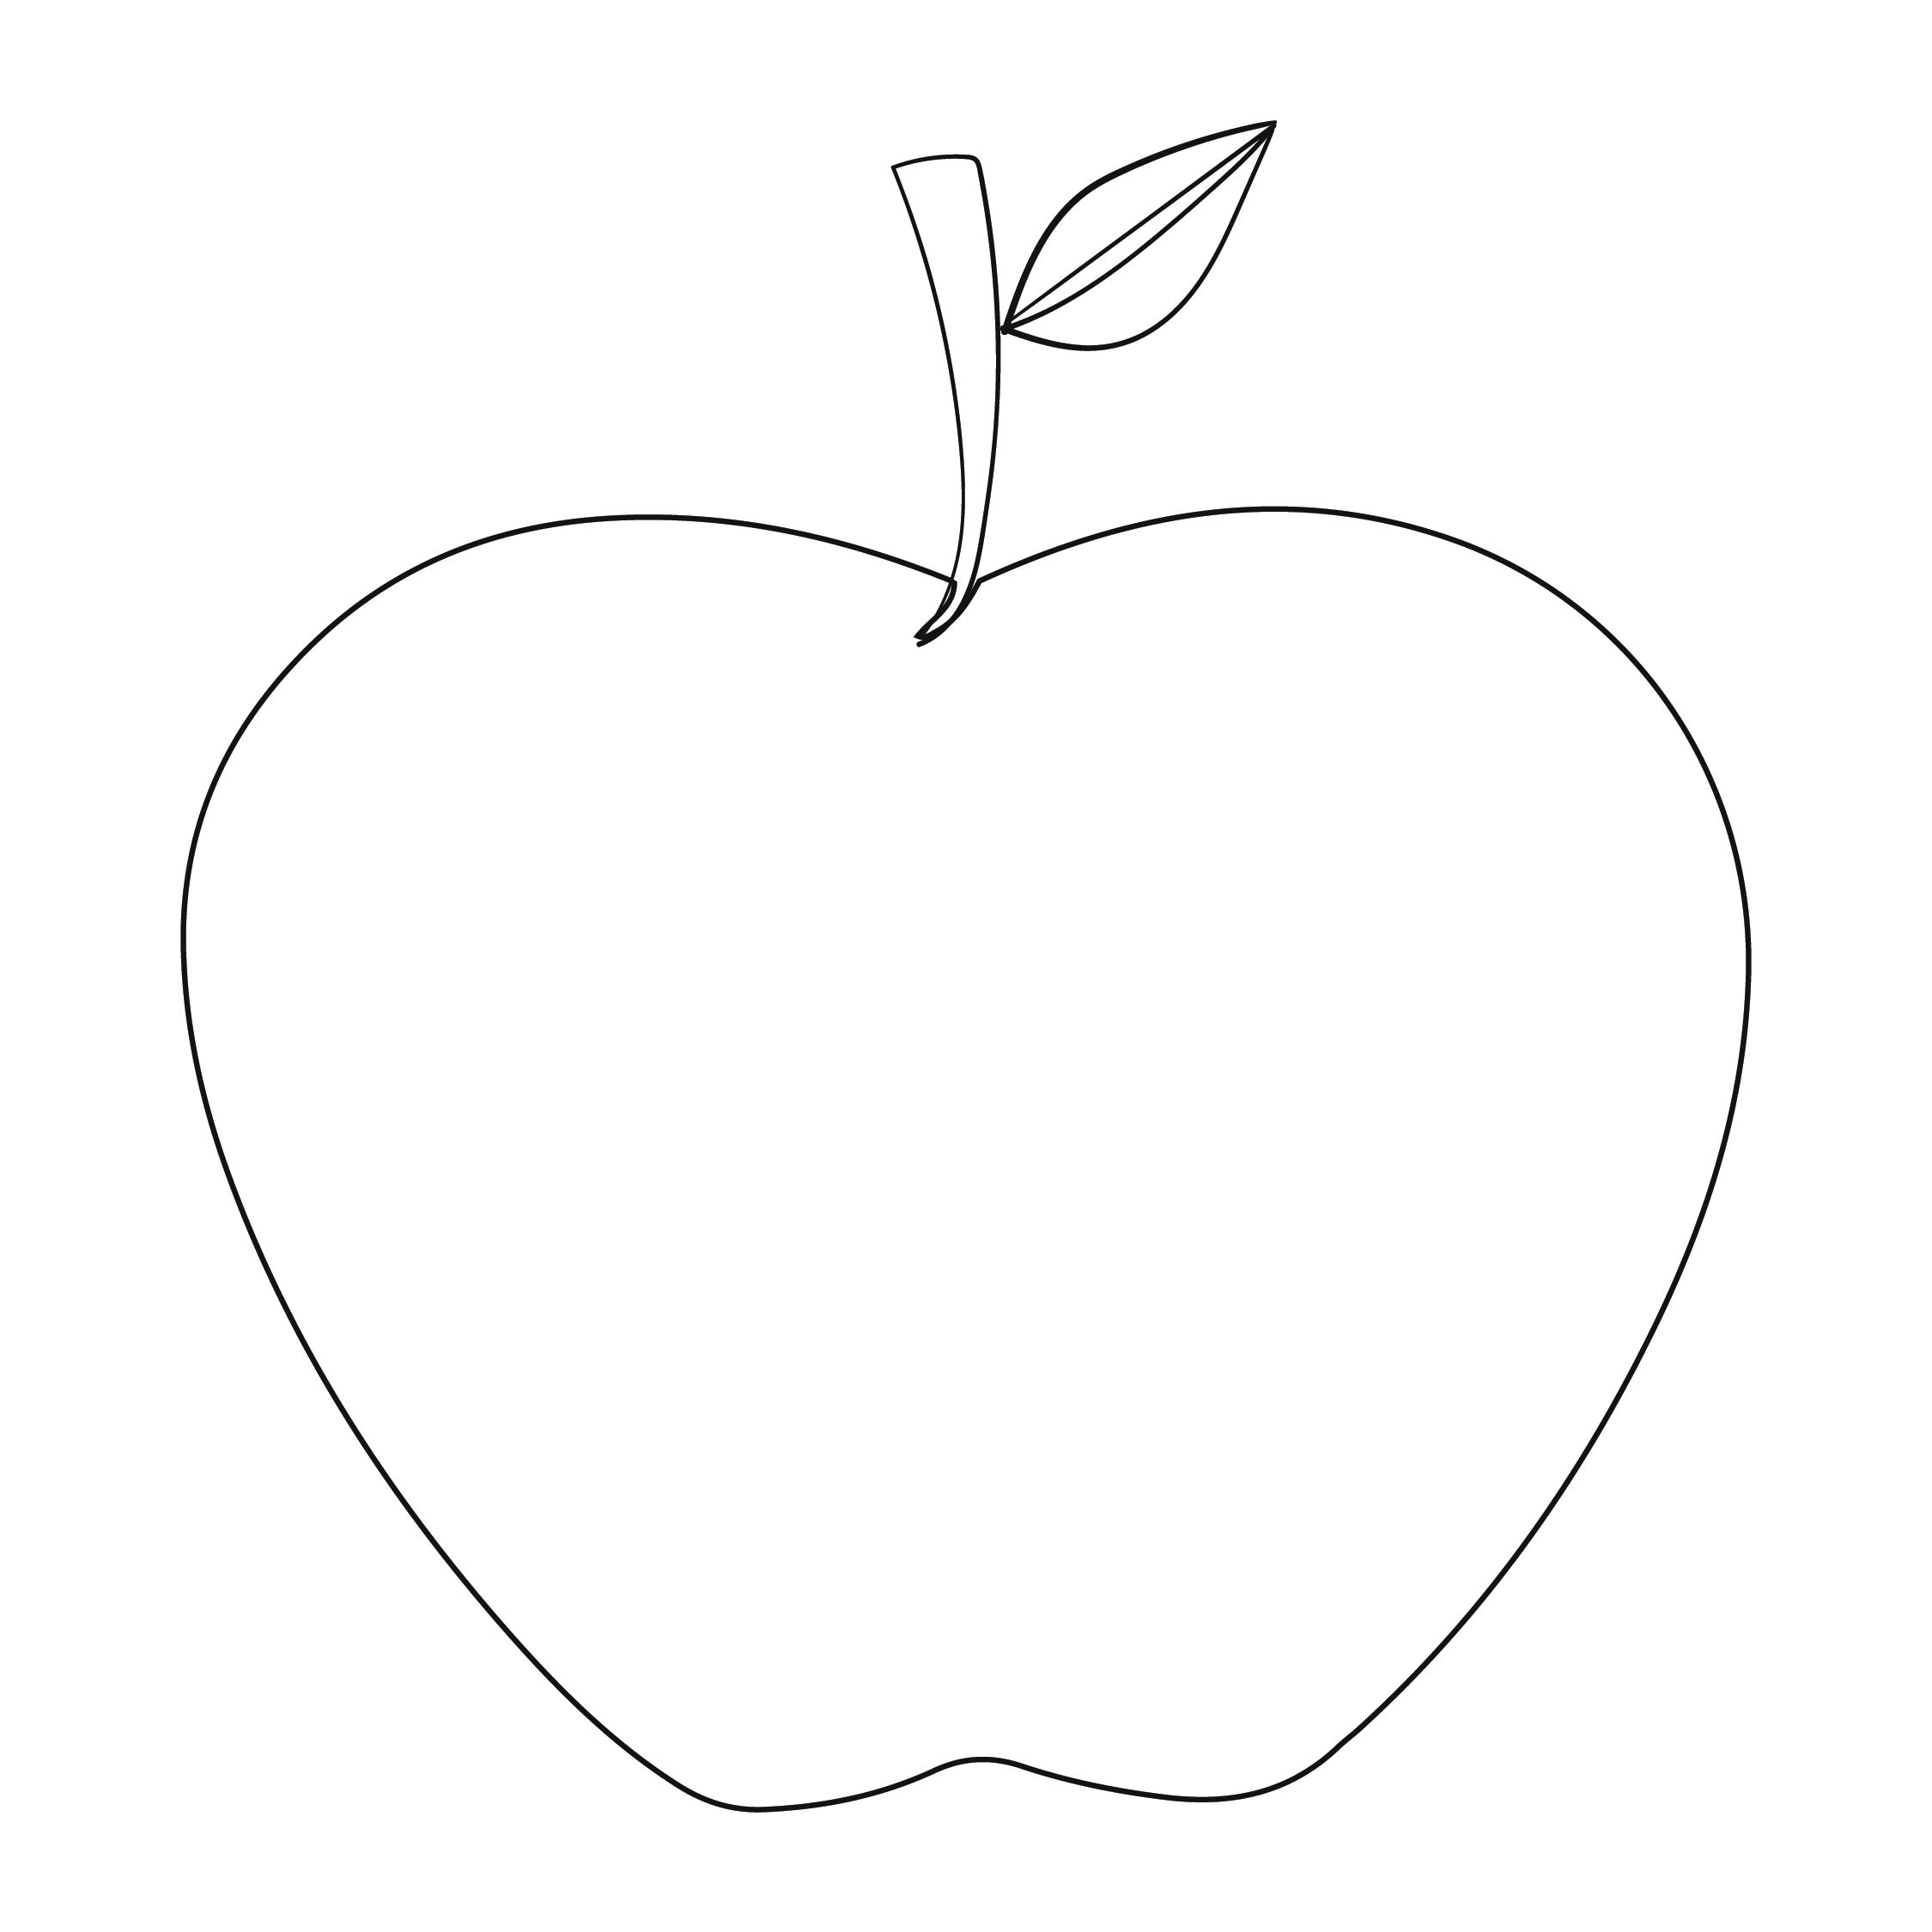 7 Best Images of Apple Template Printable Apple Outline Printable